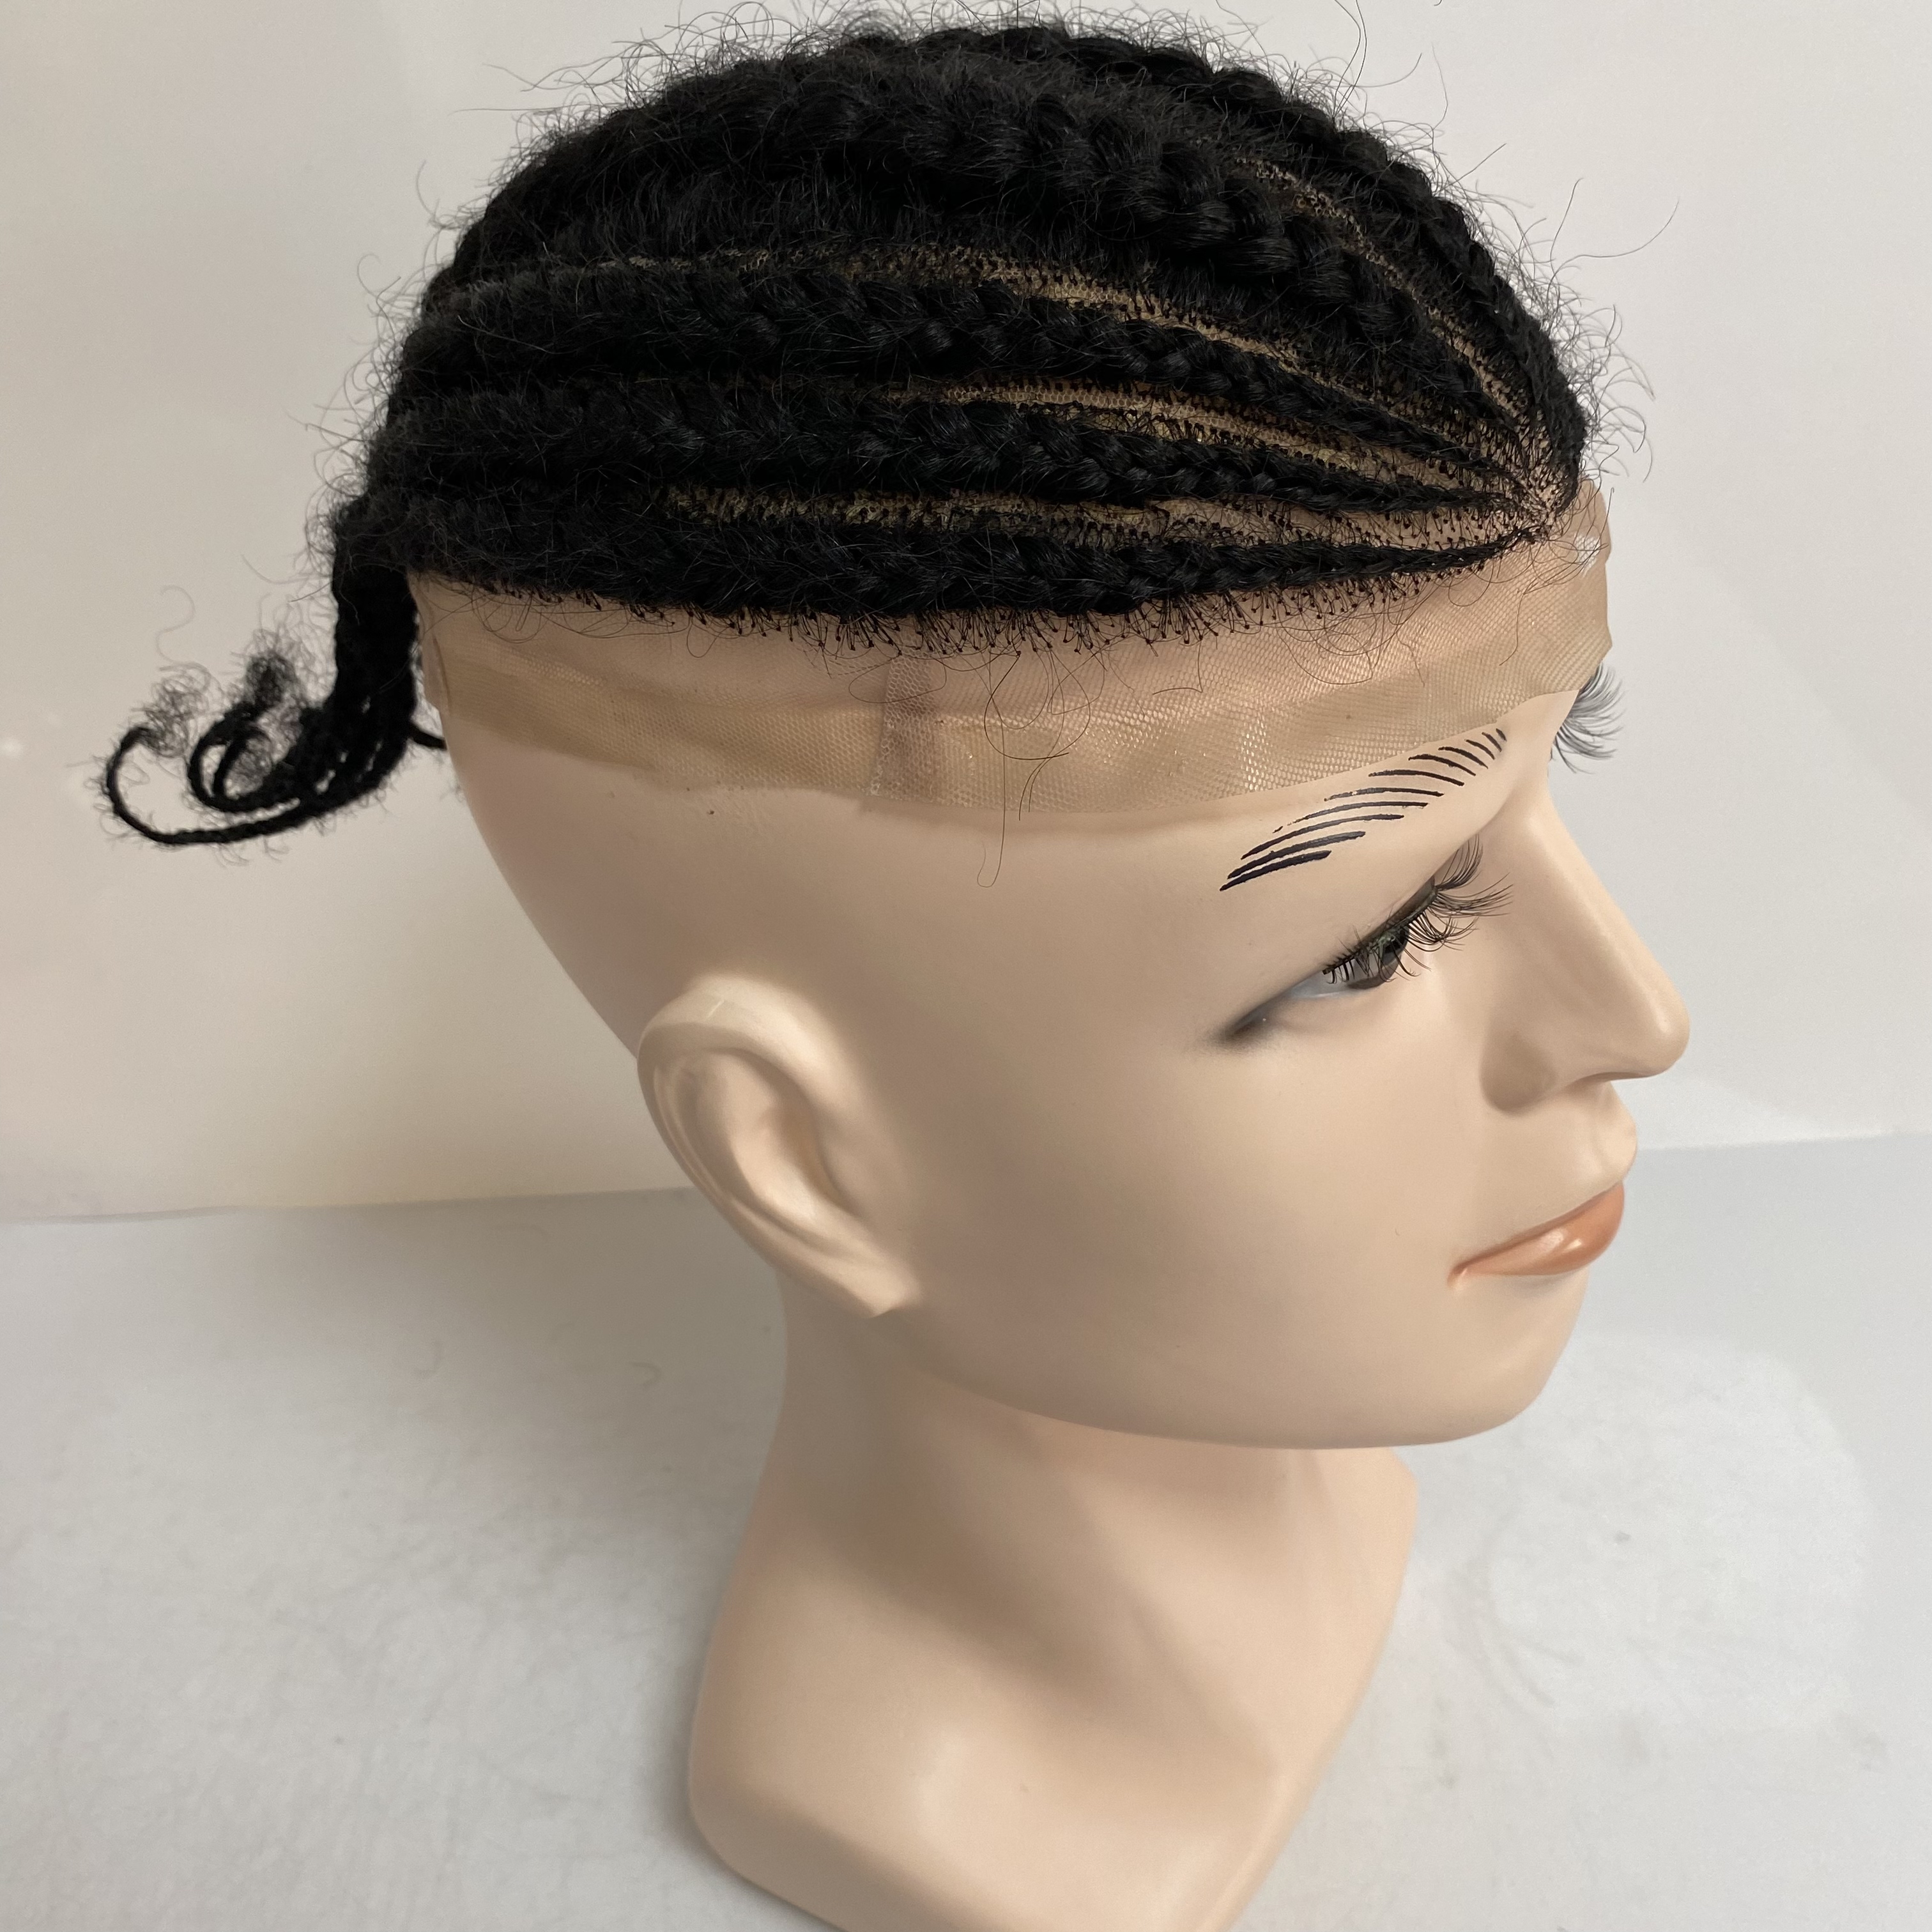 Wear To Go African Short Full Lace Braided Hairstyles For Men American Afro Men's Toupee Hair System With Braids Hairstyle For Balding Crown